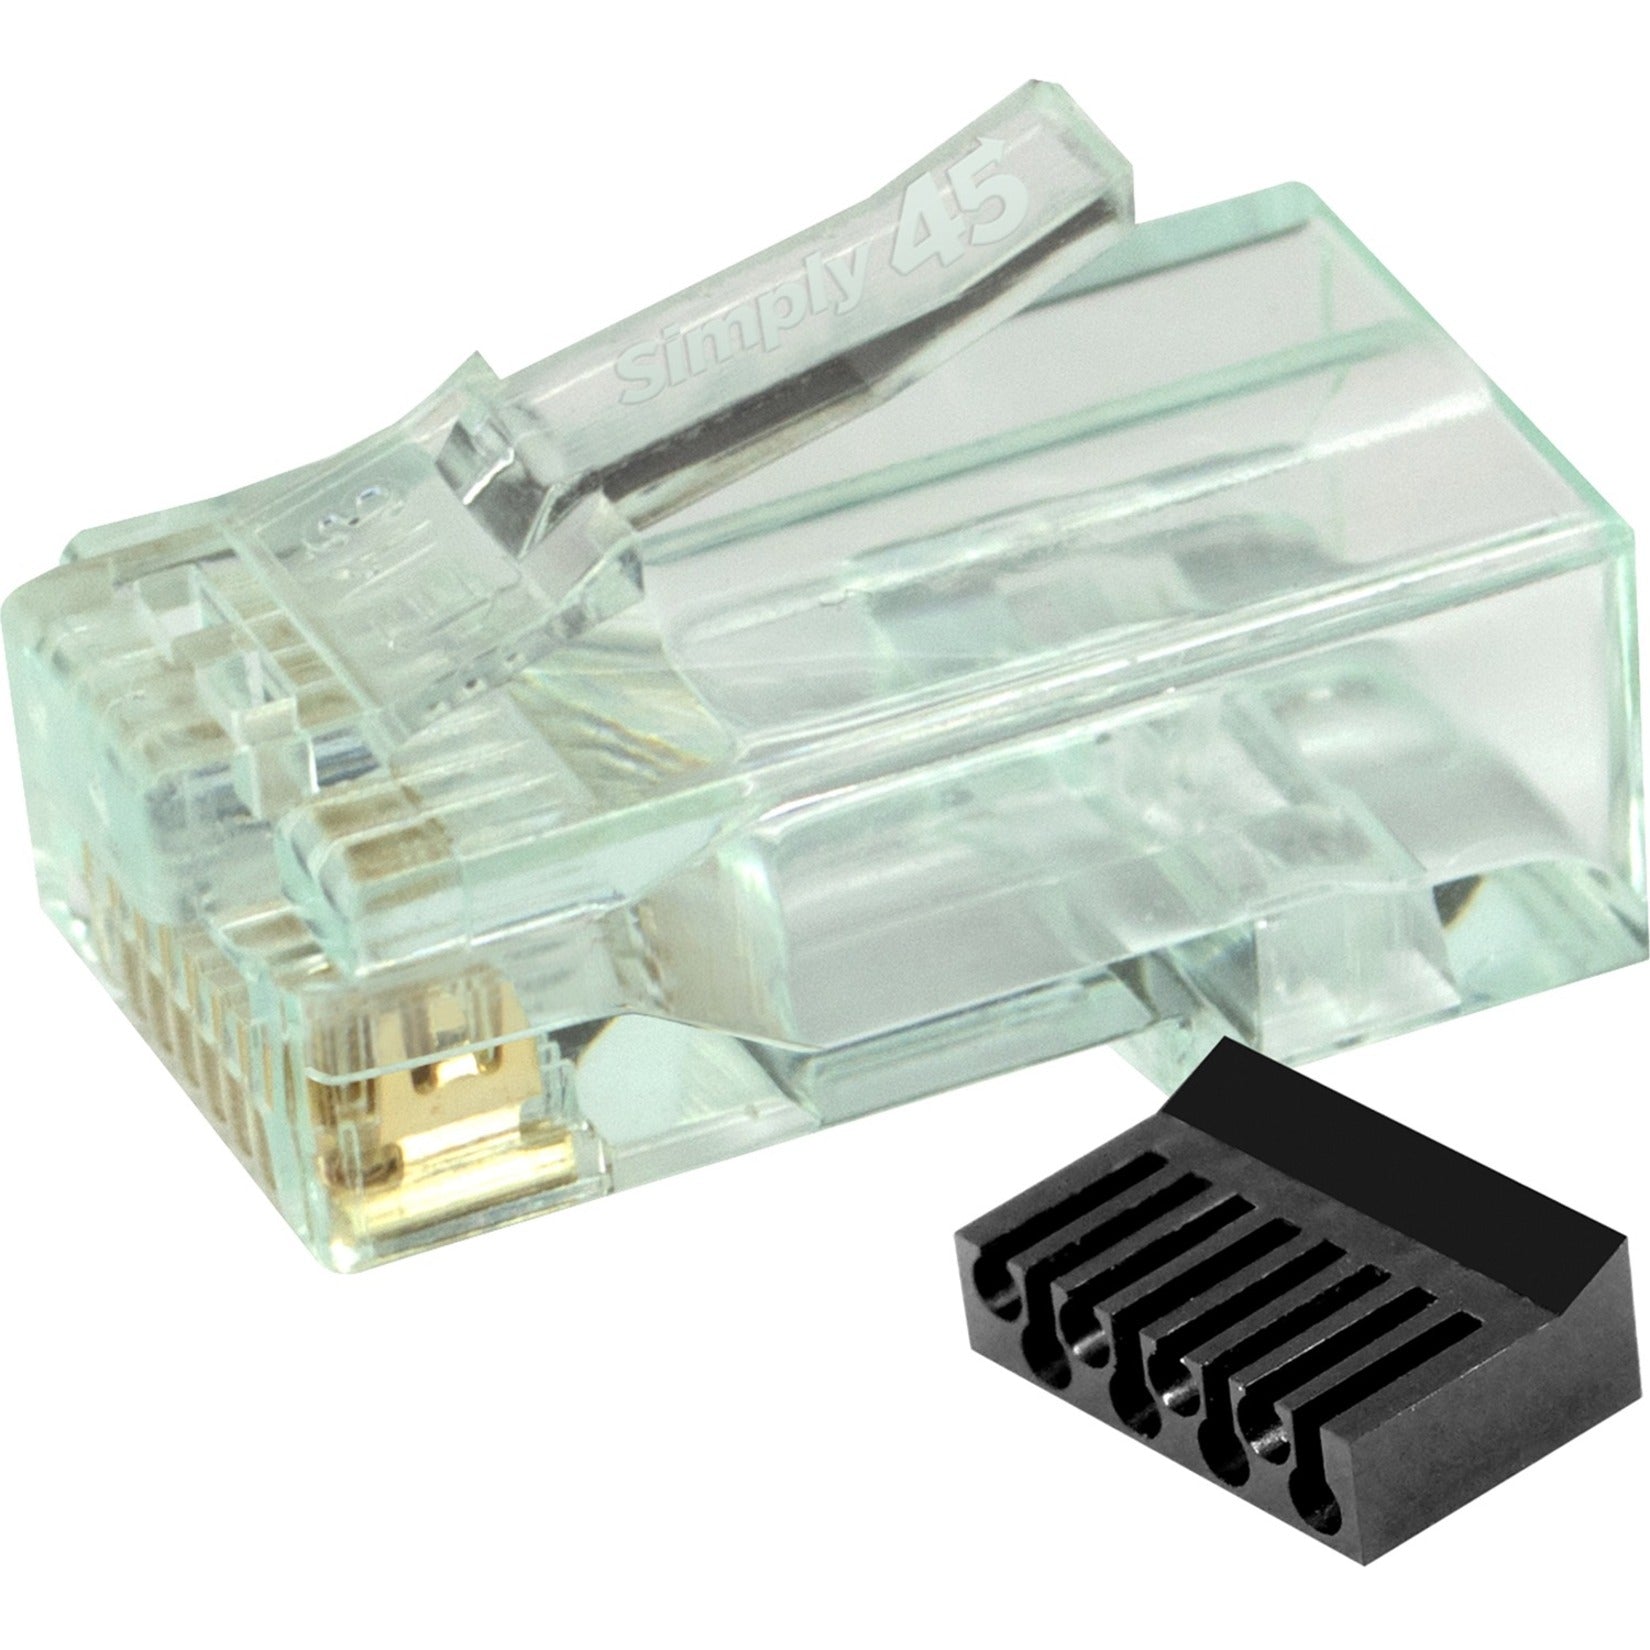 SIMPLY45 S45-1100 Cat6 Unshielded Network Connector with BarS45, Green Tint, Lifetime Warranty, TAA Compliant